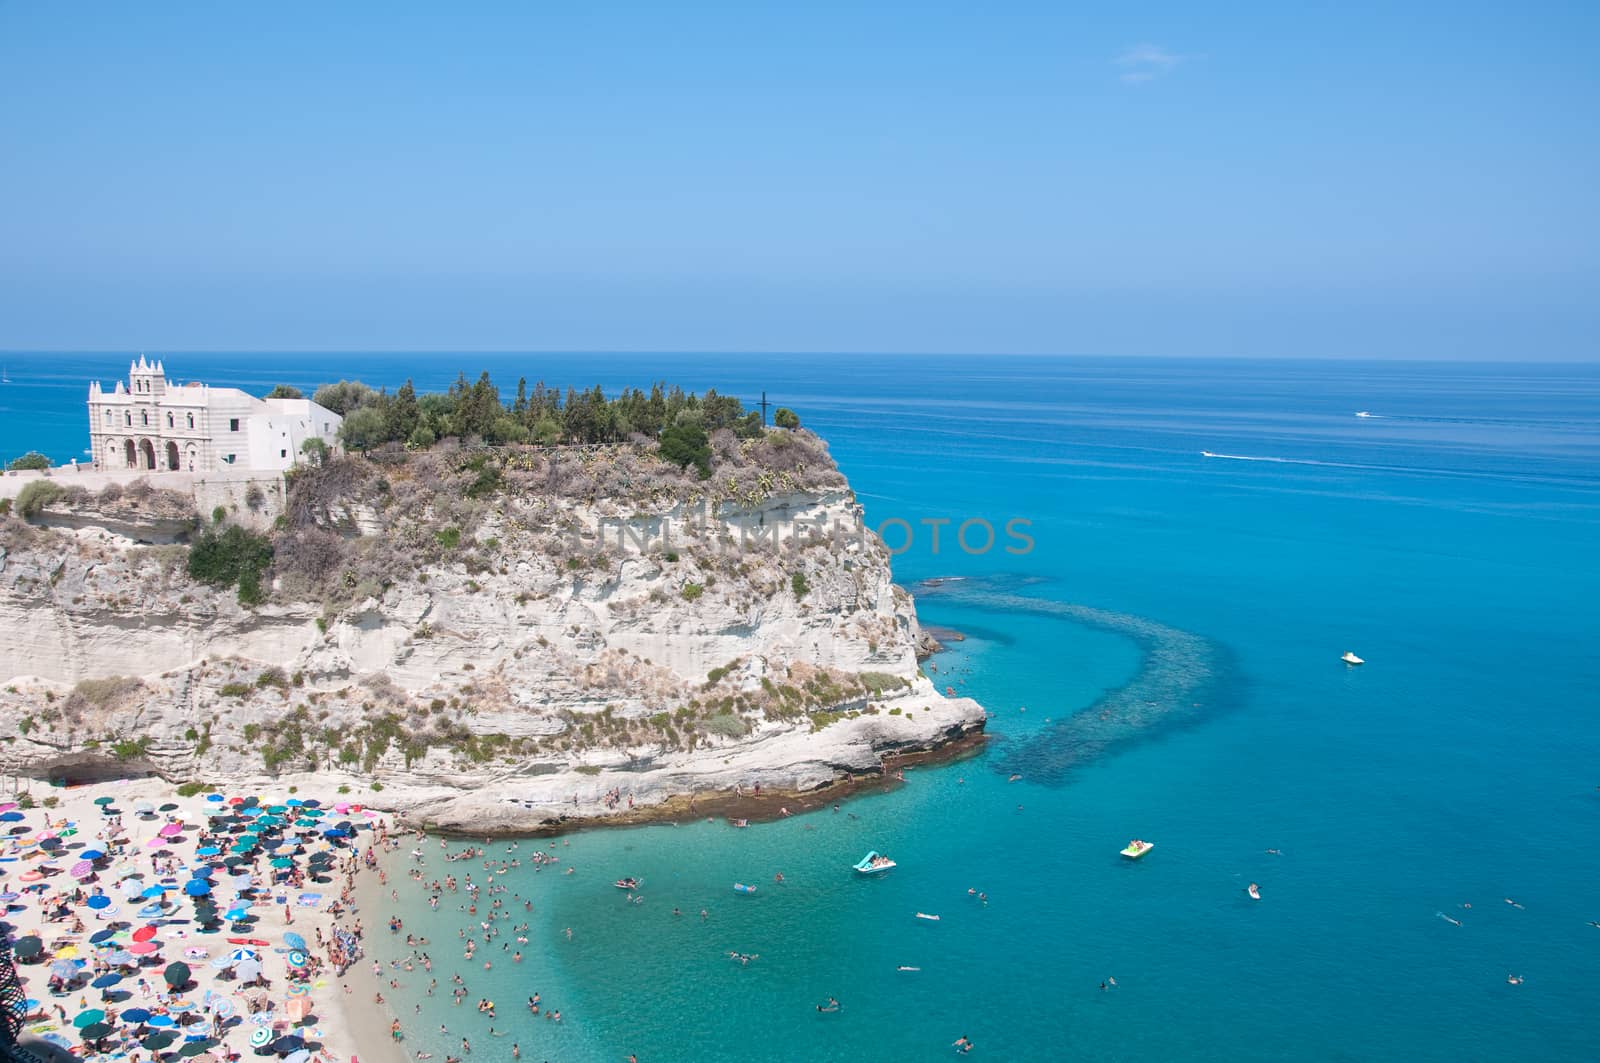 Top view of the church located on the island of Tropea, Calabria Italy